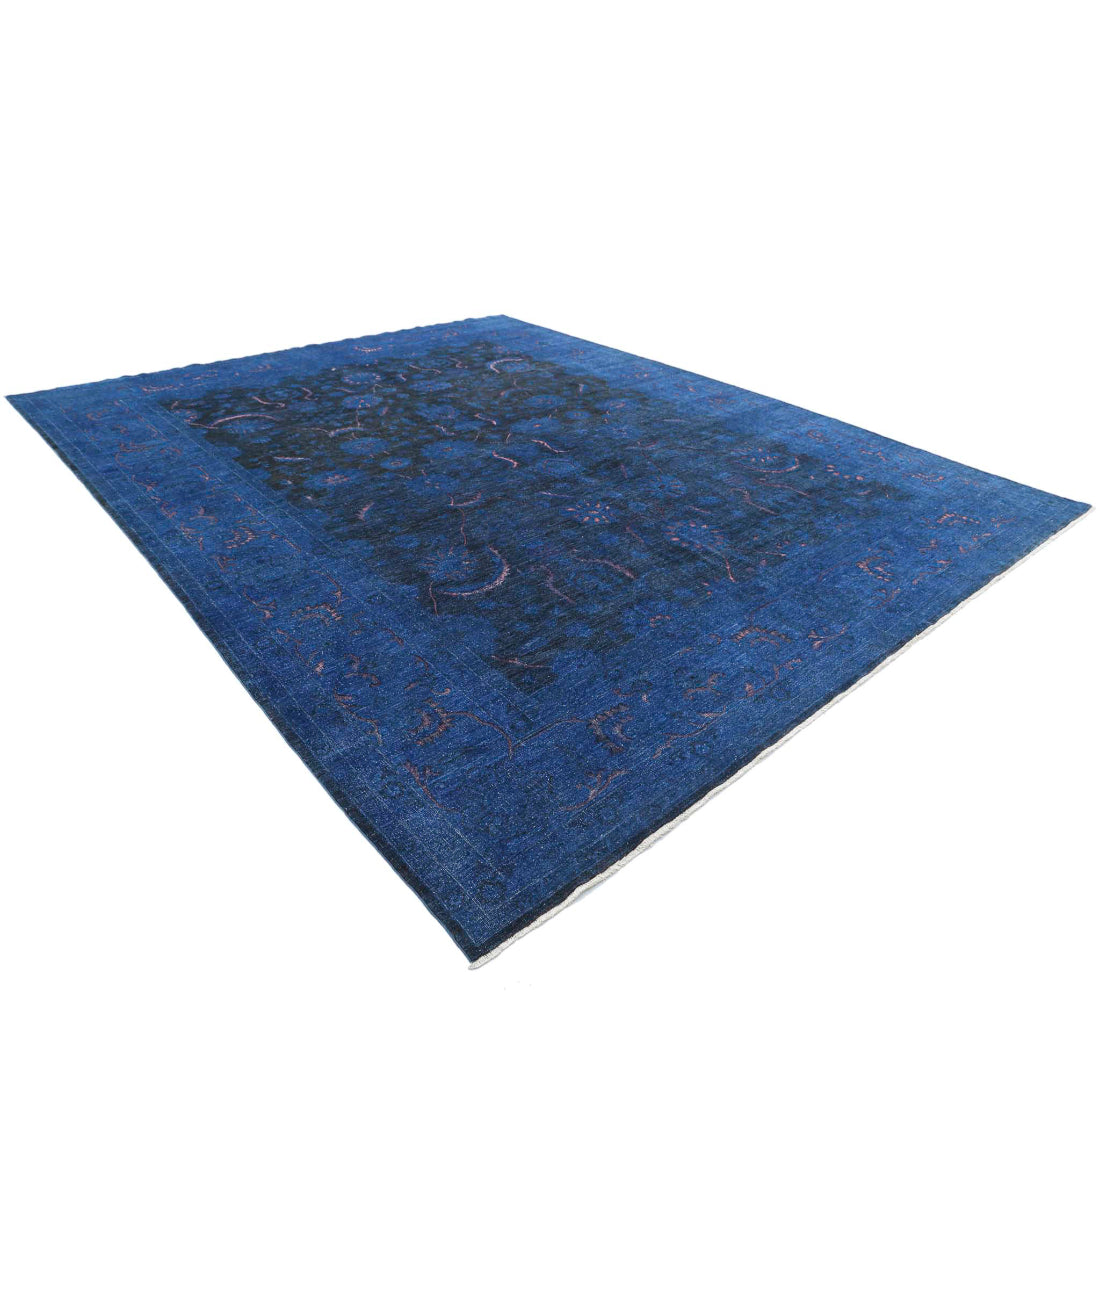 Hand Knotted Onyx Wool Rug - 11'7'' x 14'6'' 11'7'' x 14'6'' (348 X 435) / Blue / Brown